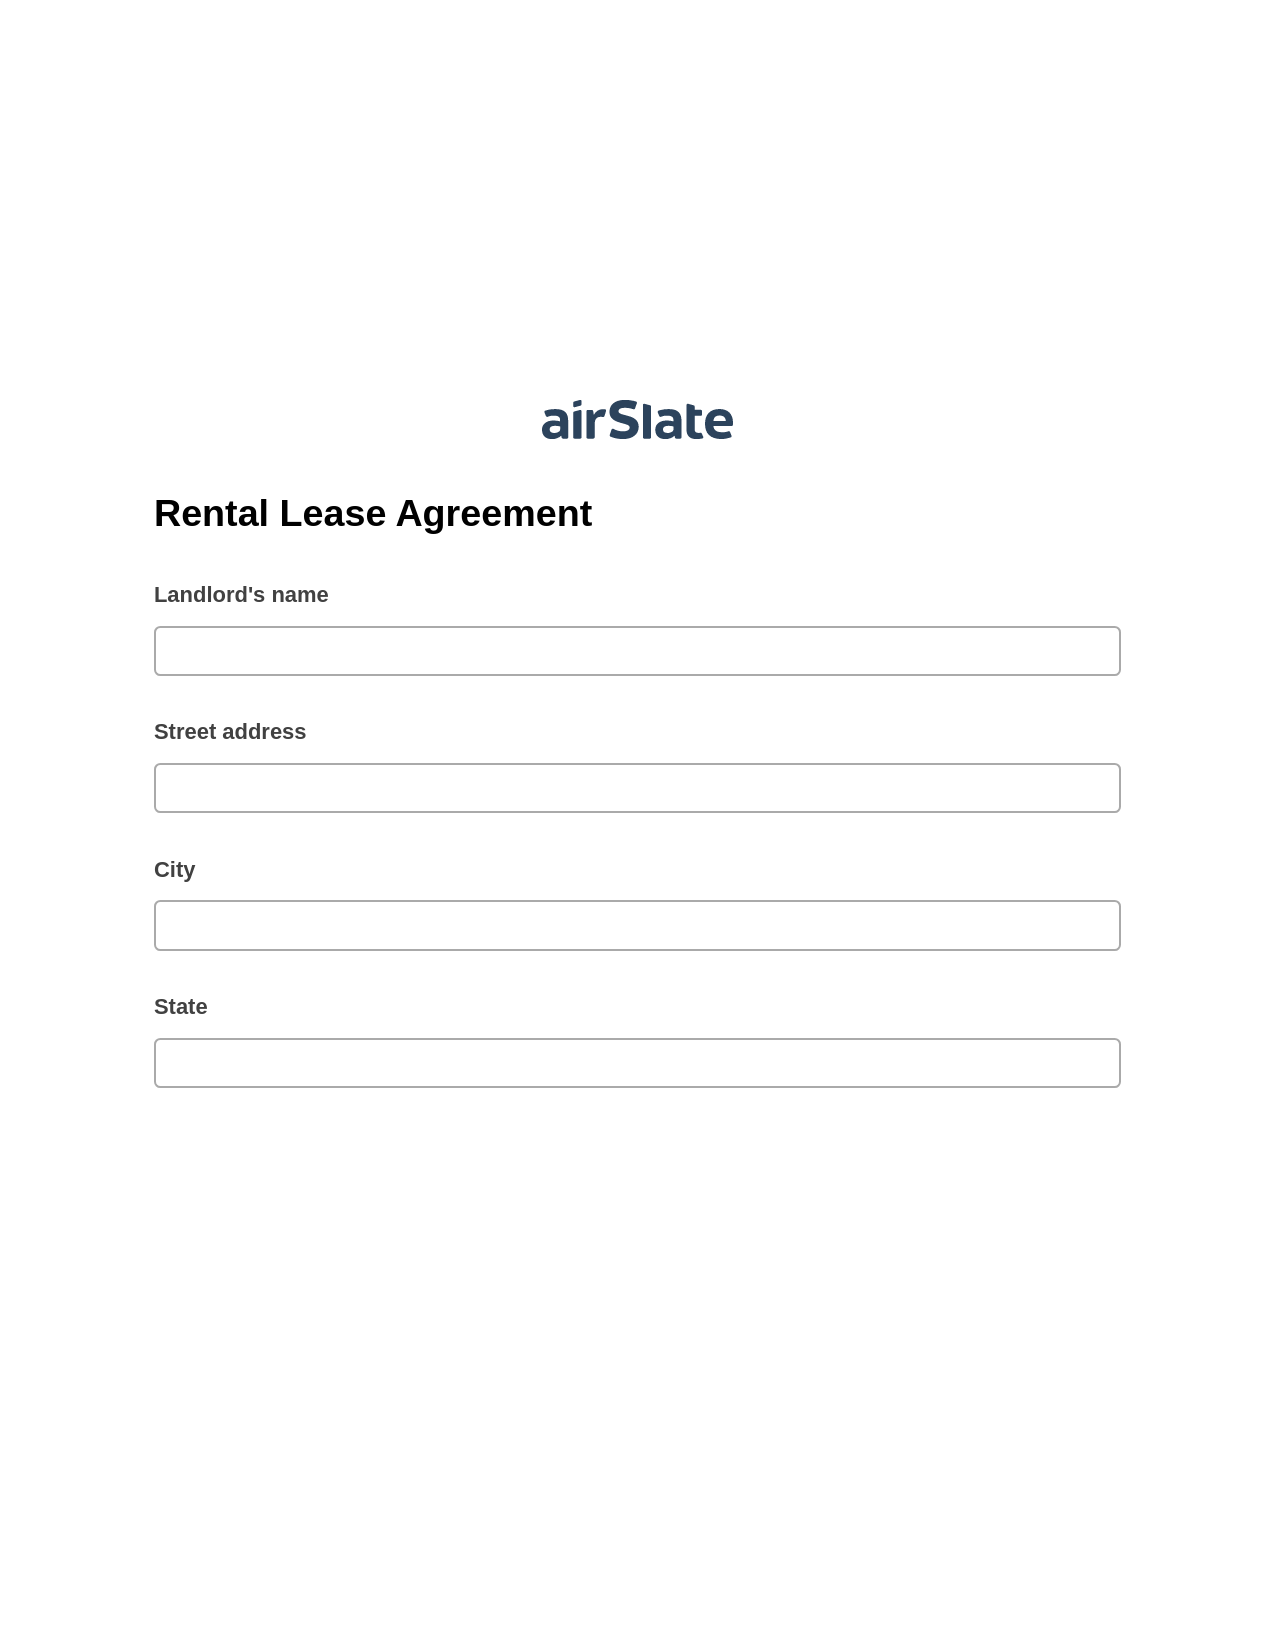 Rental Lease Agreement Pre-fill from Salesforce Record Bot, System Bot - Create a Slate in another Flow, Archive to SharePoint Folder Bot